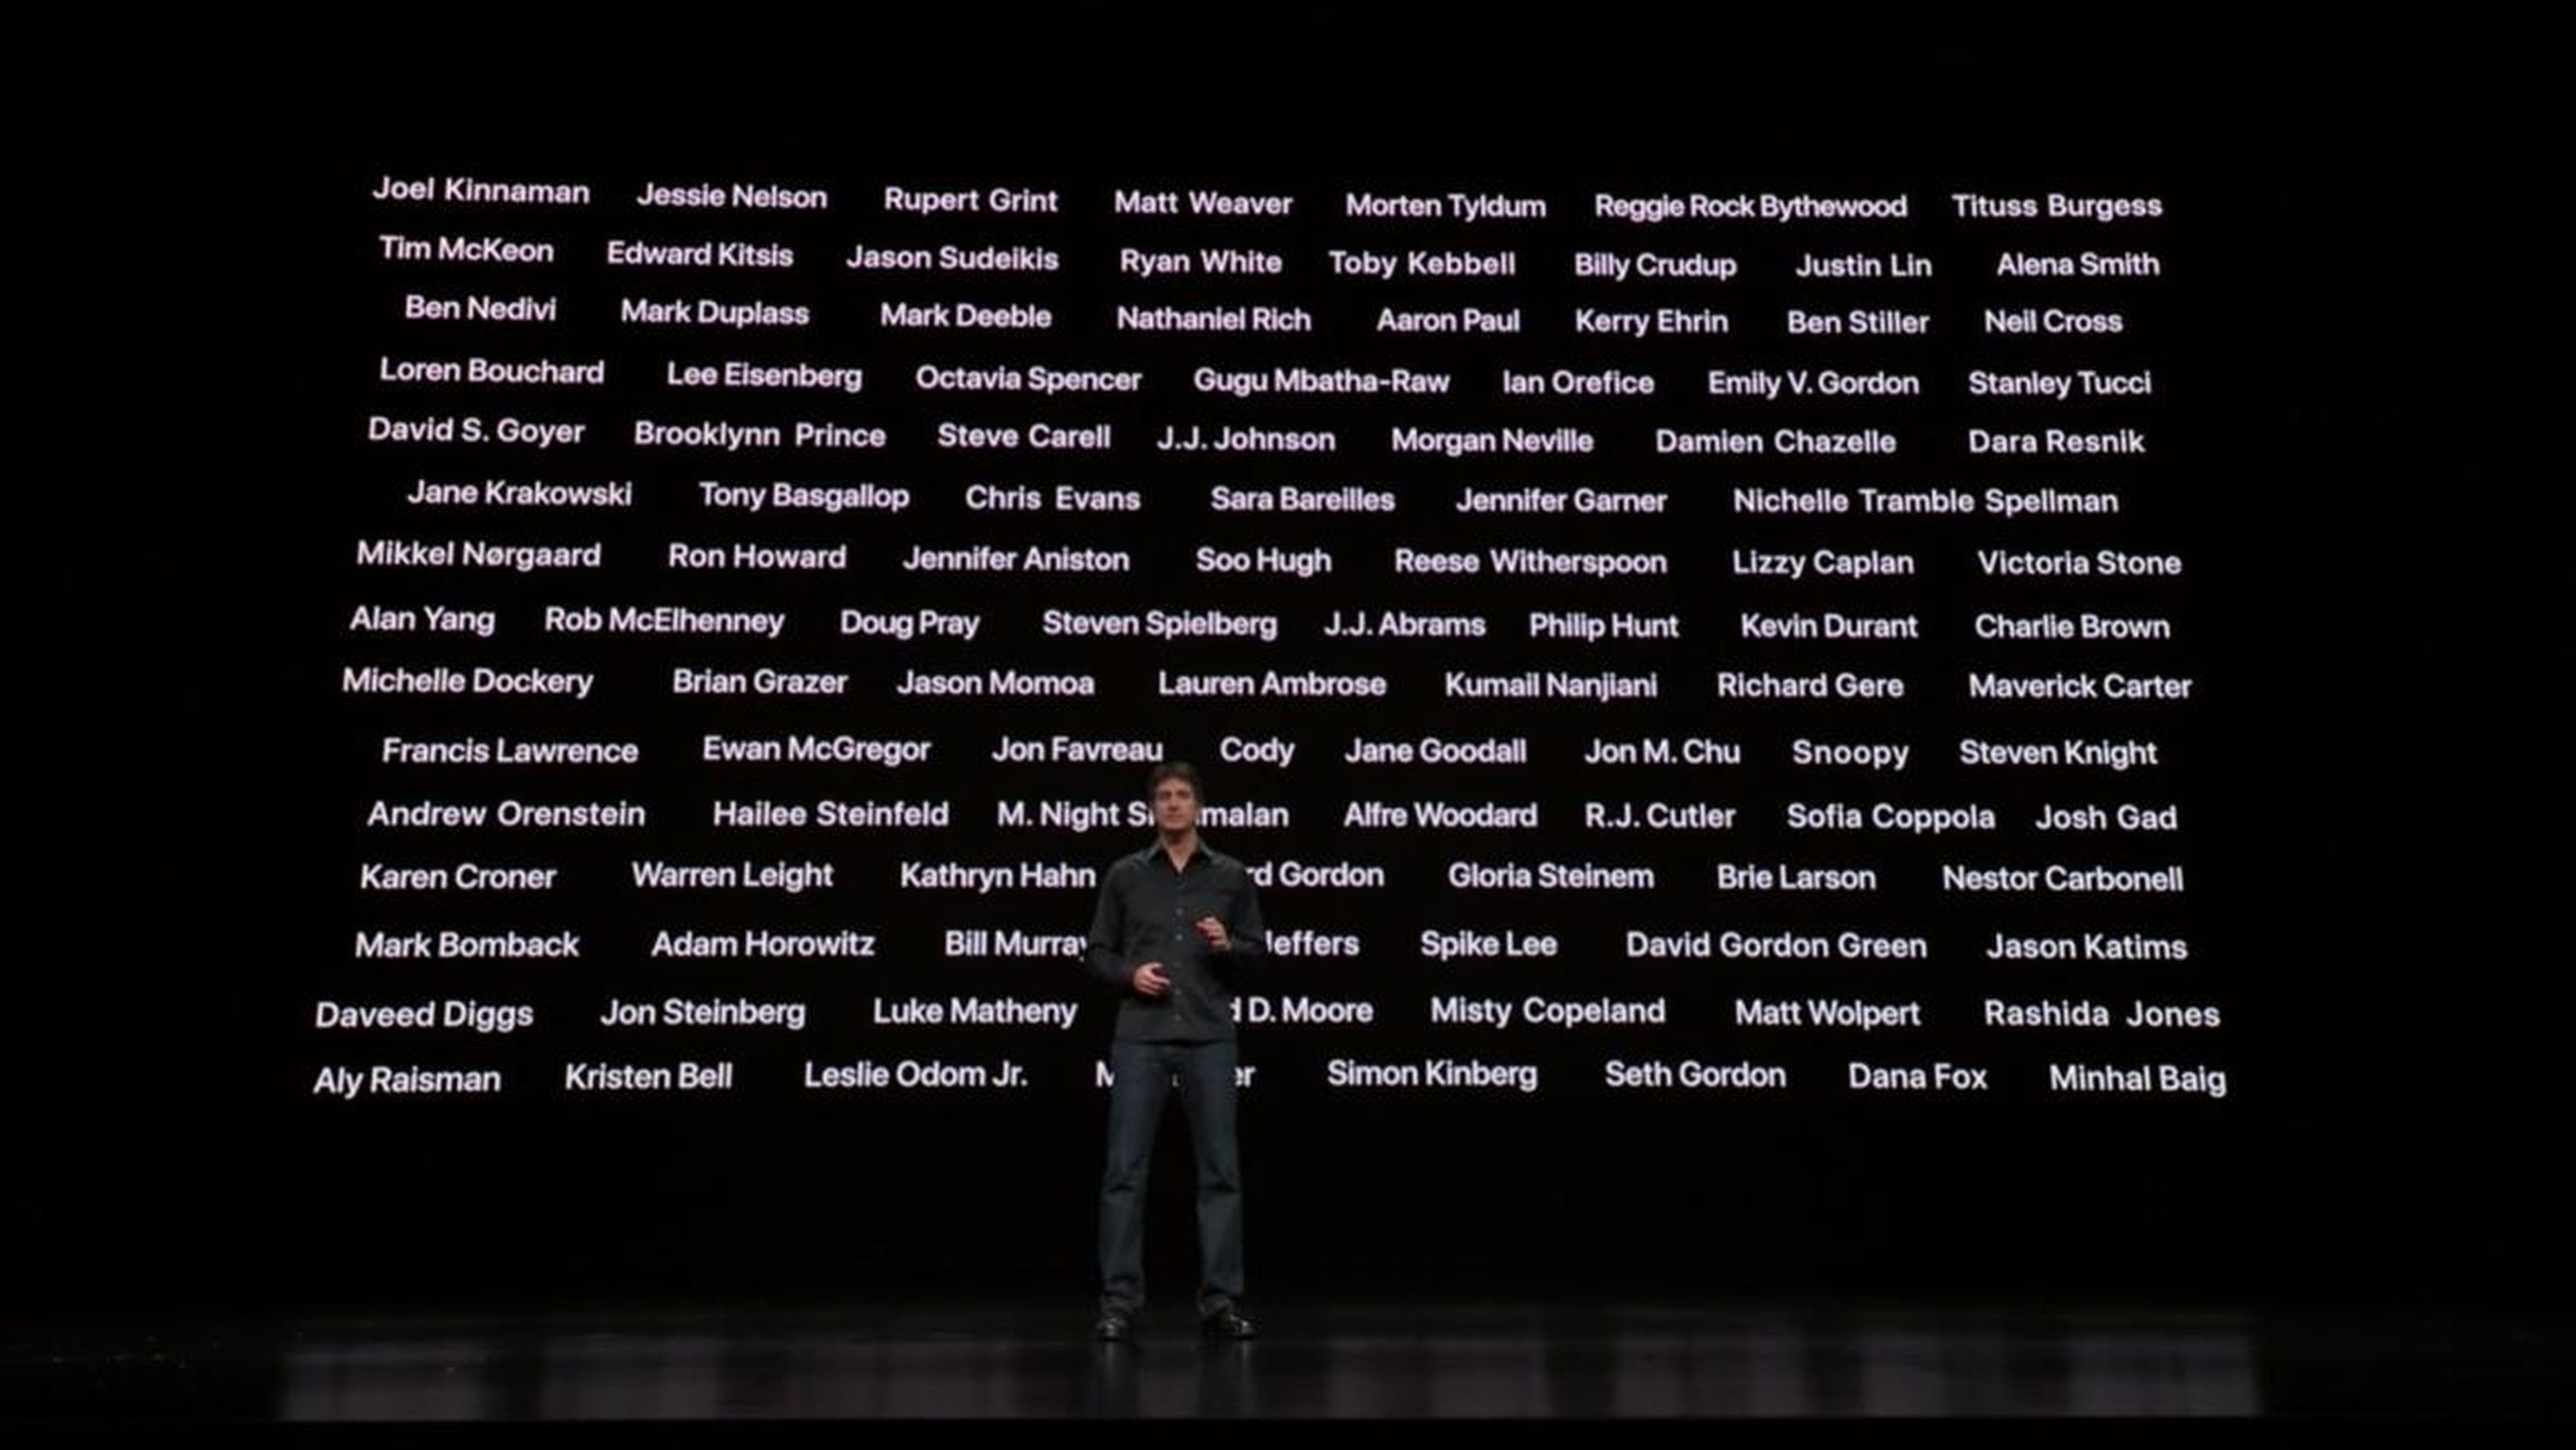 Apple says it has partnered with the most accomplished storytellers, and a new generation of the most exciting voices, to make Apple TV Plus a destination for high-quality originals, from dramas to documentaries and beyond.